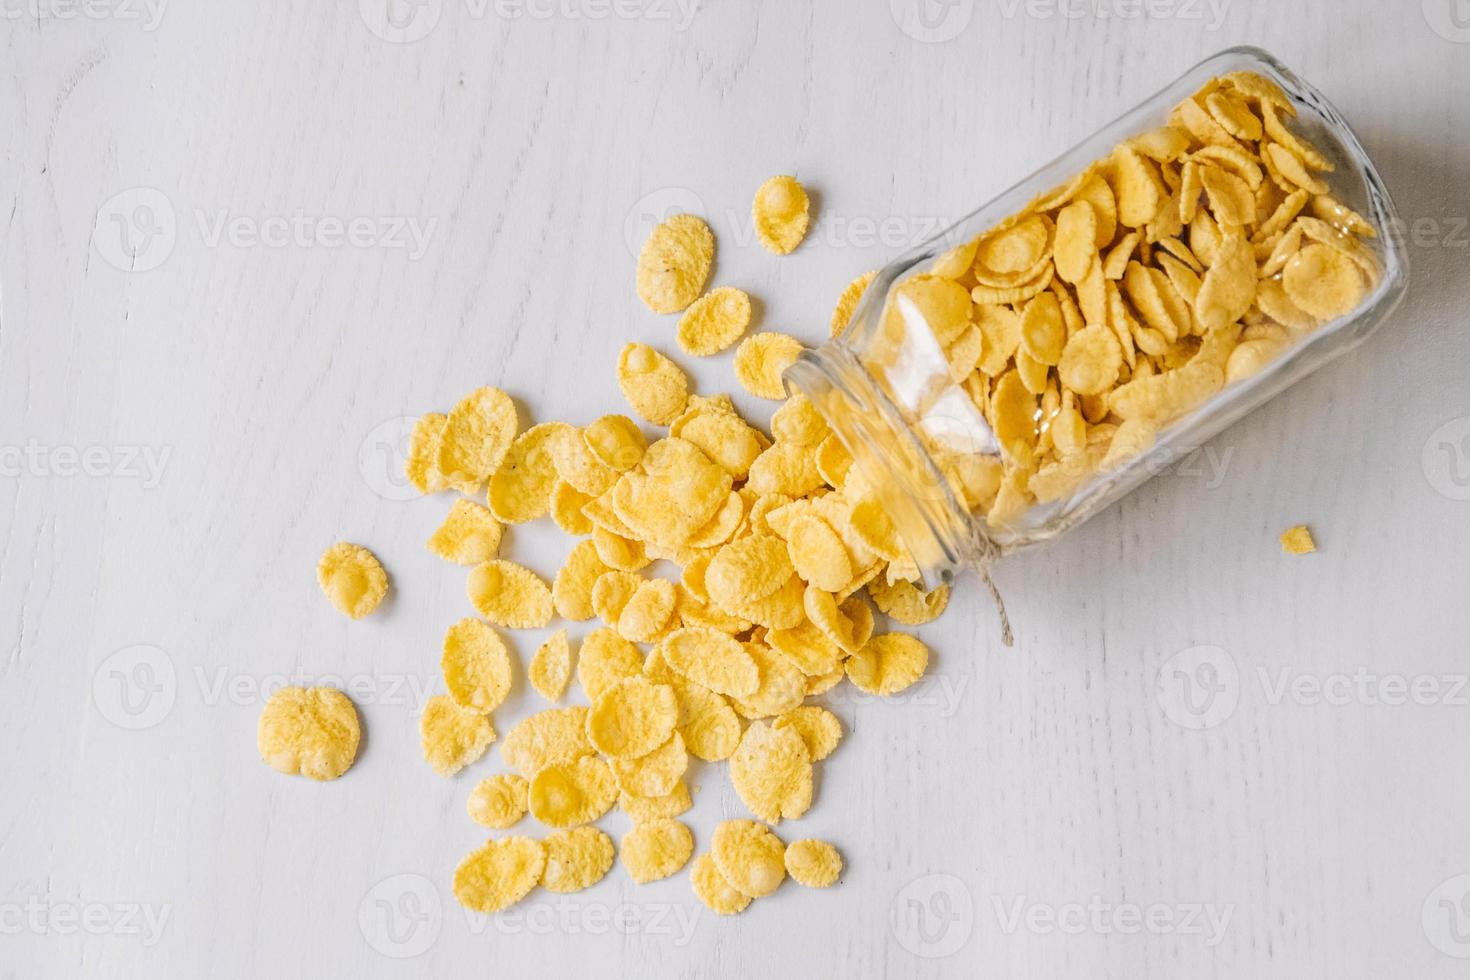 Corn flakes in a glass jar on white wooden surface photo